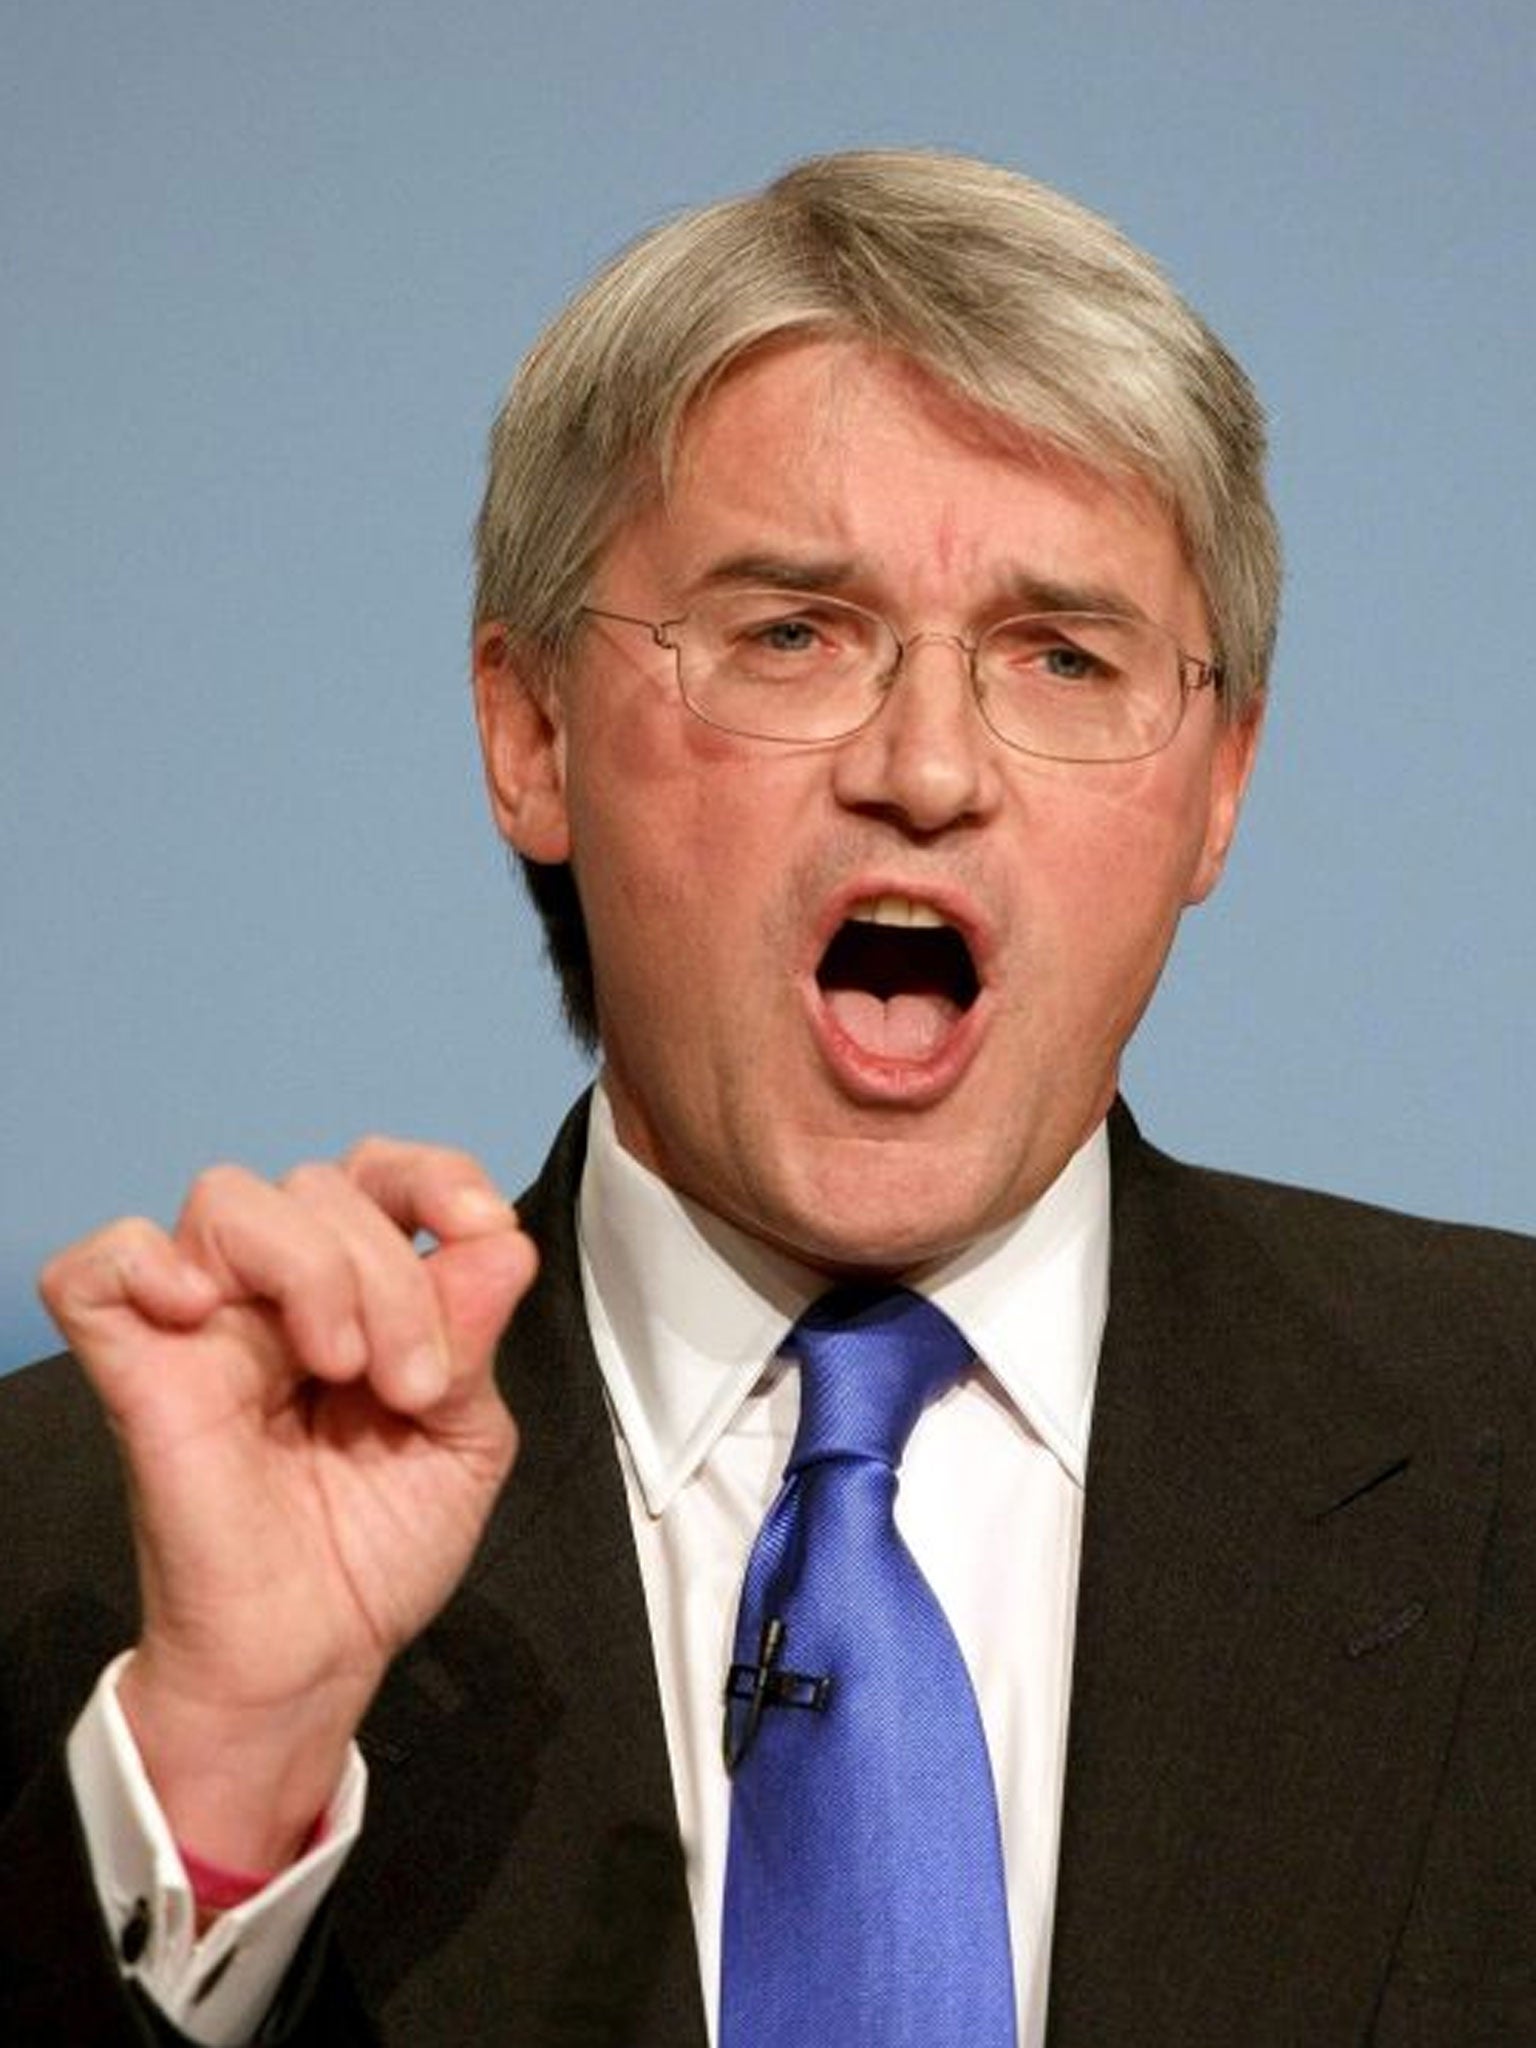 Andrew Mitchell has told how he was caught "between the pincers" of the police and the media when the plebgate row that led to him being ousted erupted last year